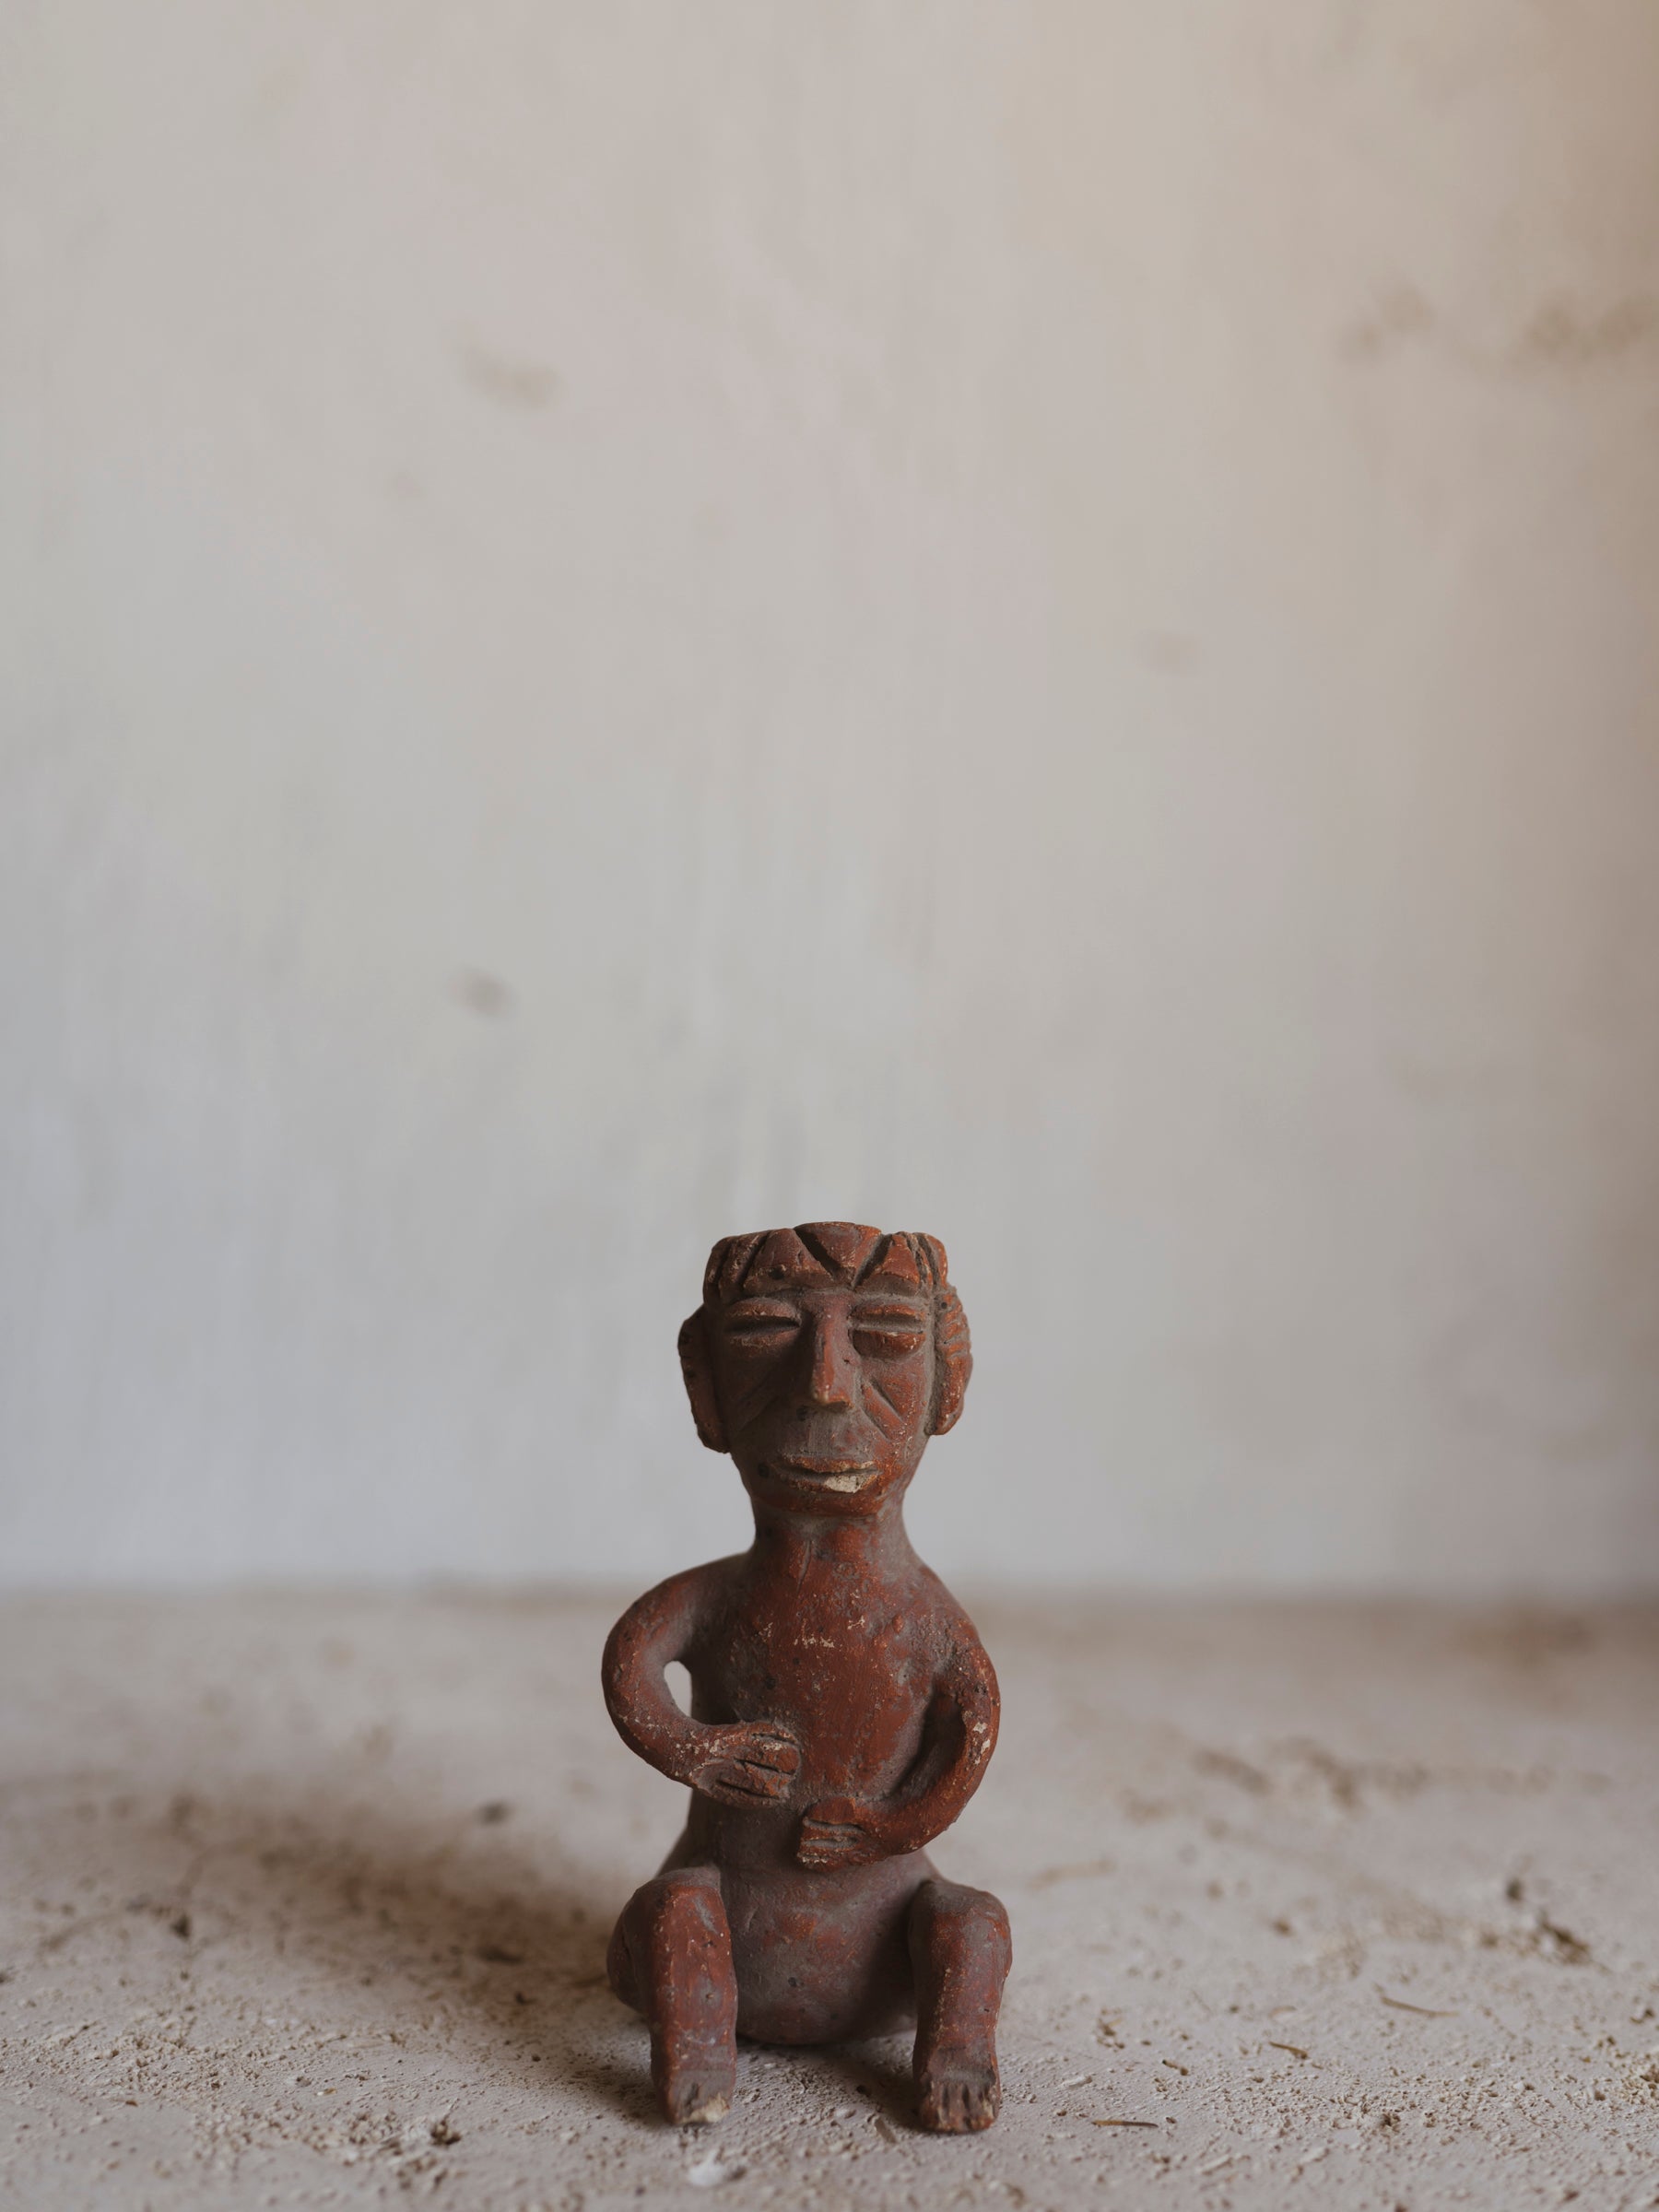 5" Assorted Guatemalan Clay Statue